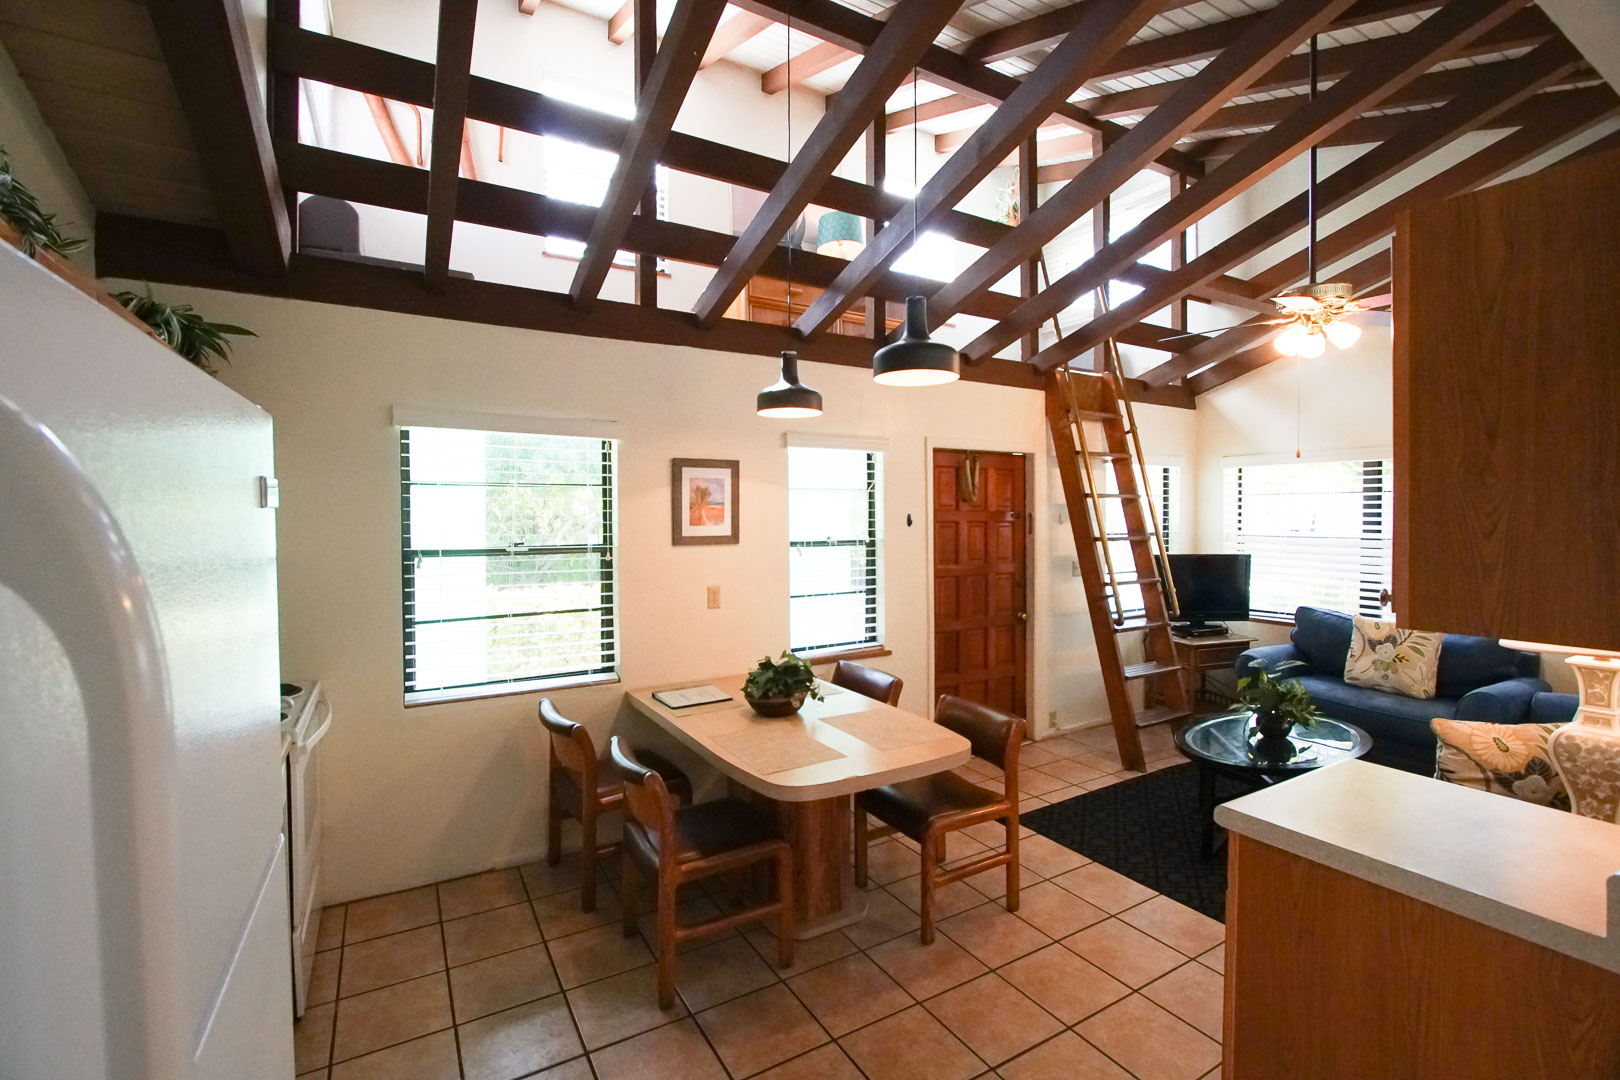 A spacious 2 bedroom loft at VRI's Sand Dune Shores in Florida.